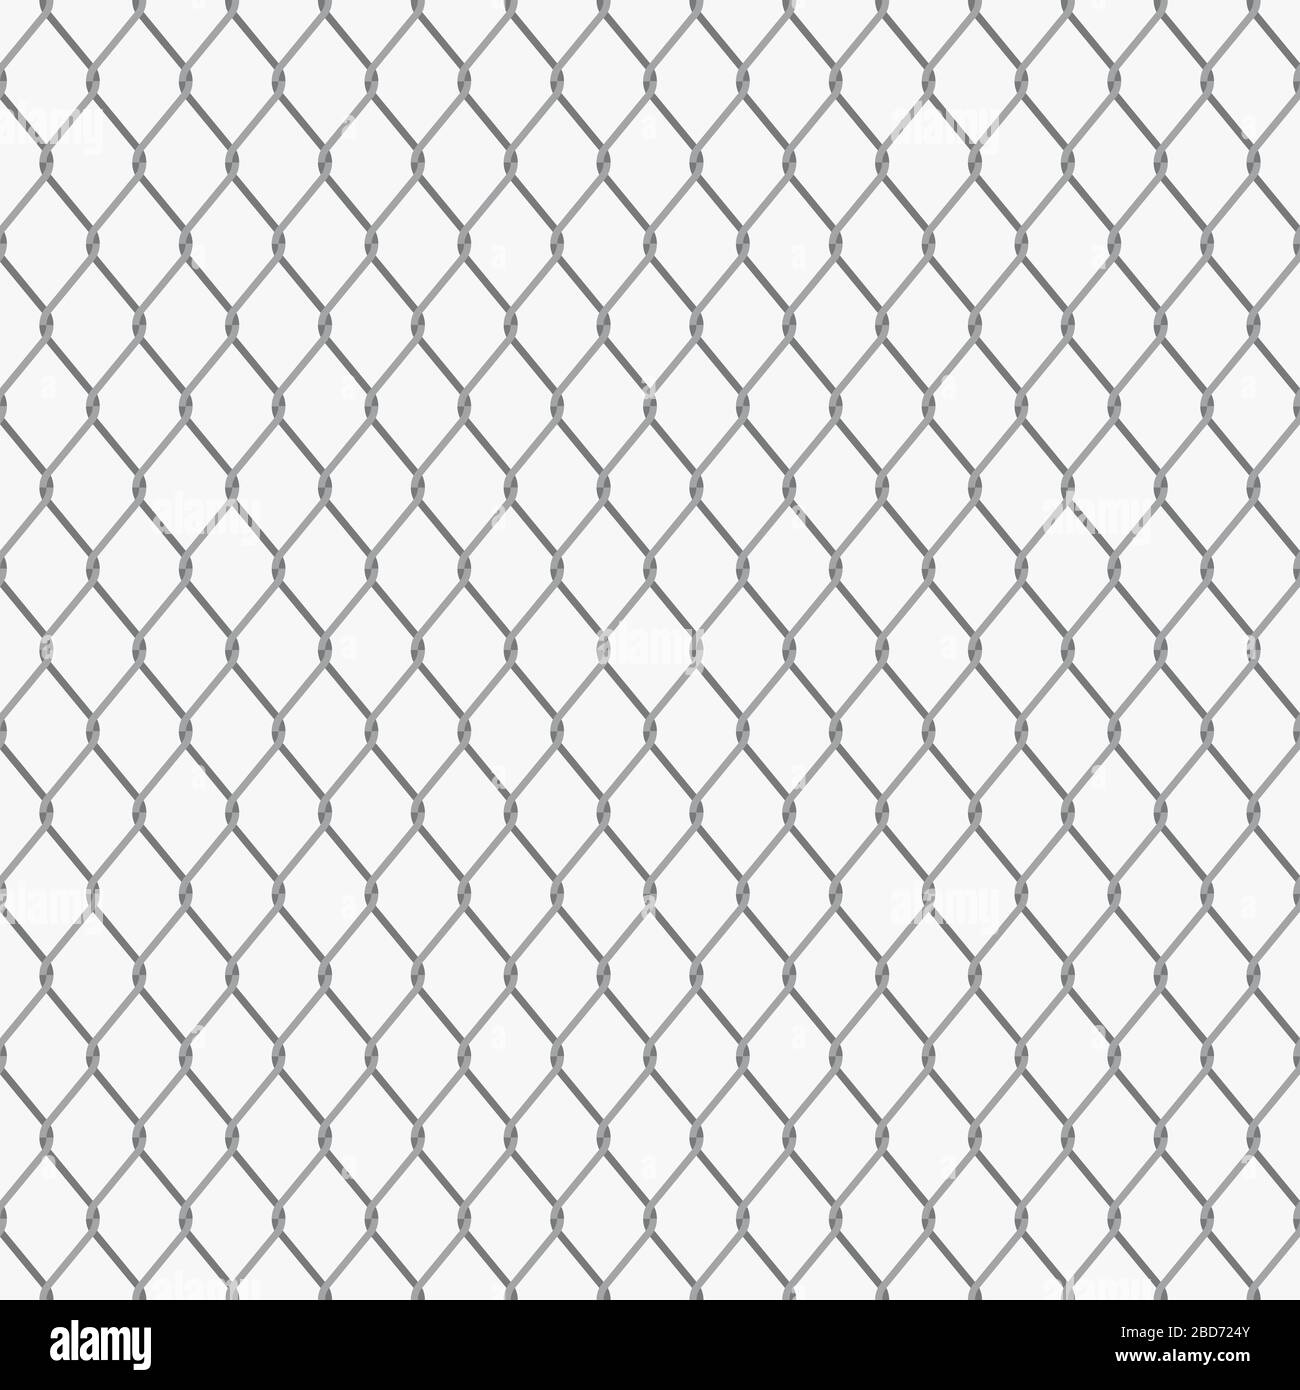 chain link fence seamless pattern Stock Vector